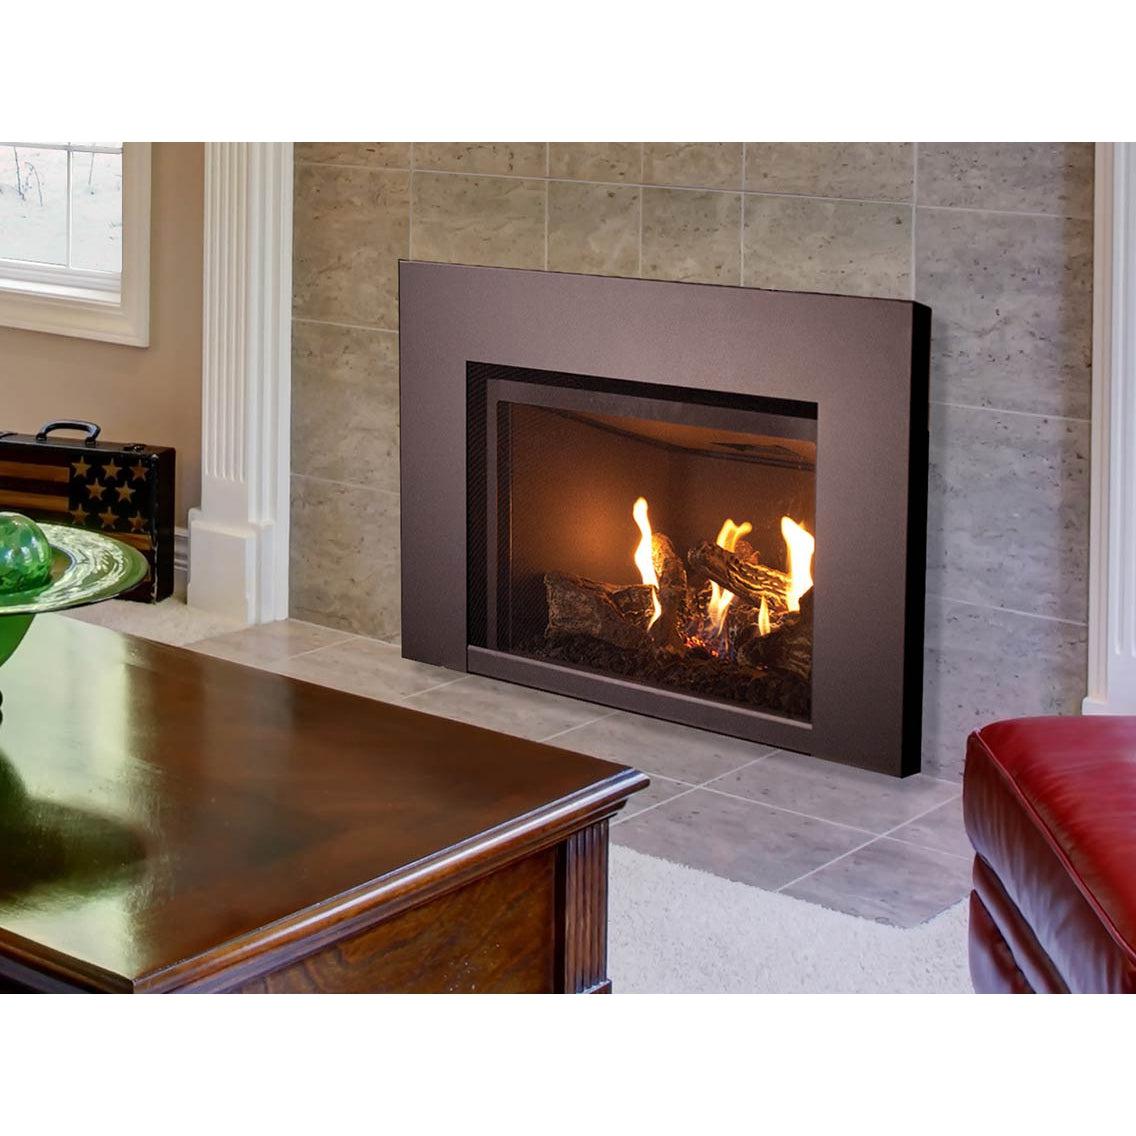 Superior DRI2032 32" Traditional Direct Vent Natural Gas Fireplace Insert